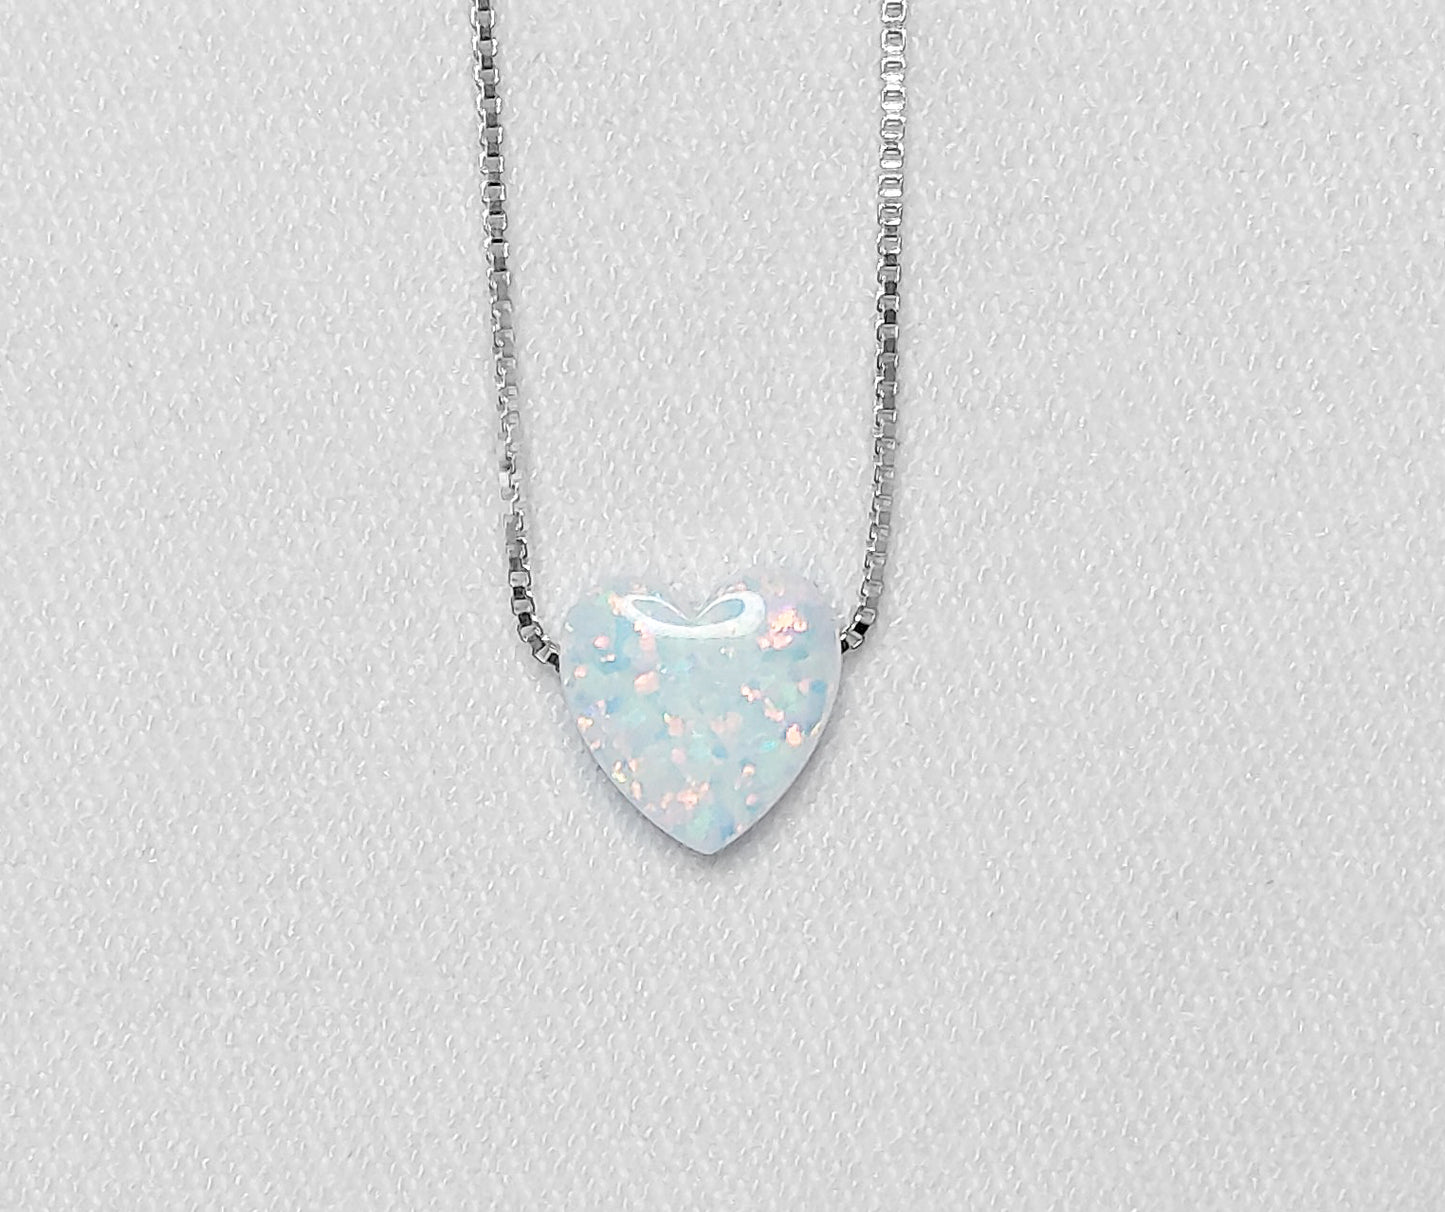 Crushed Opal Necklace - Sterling Silver